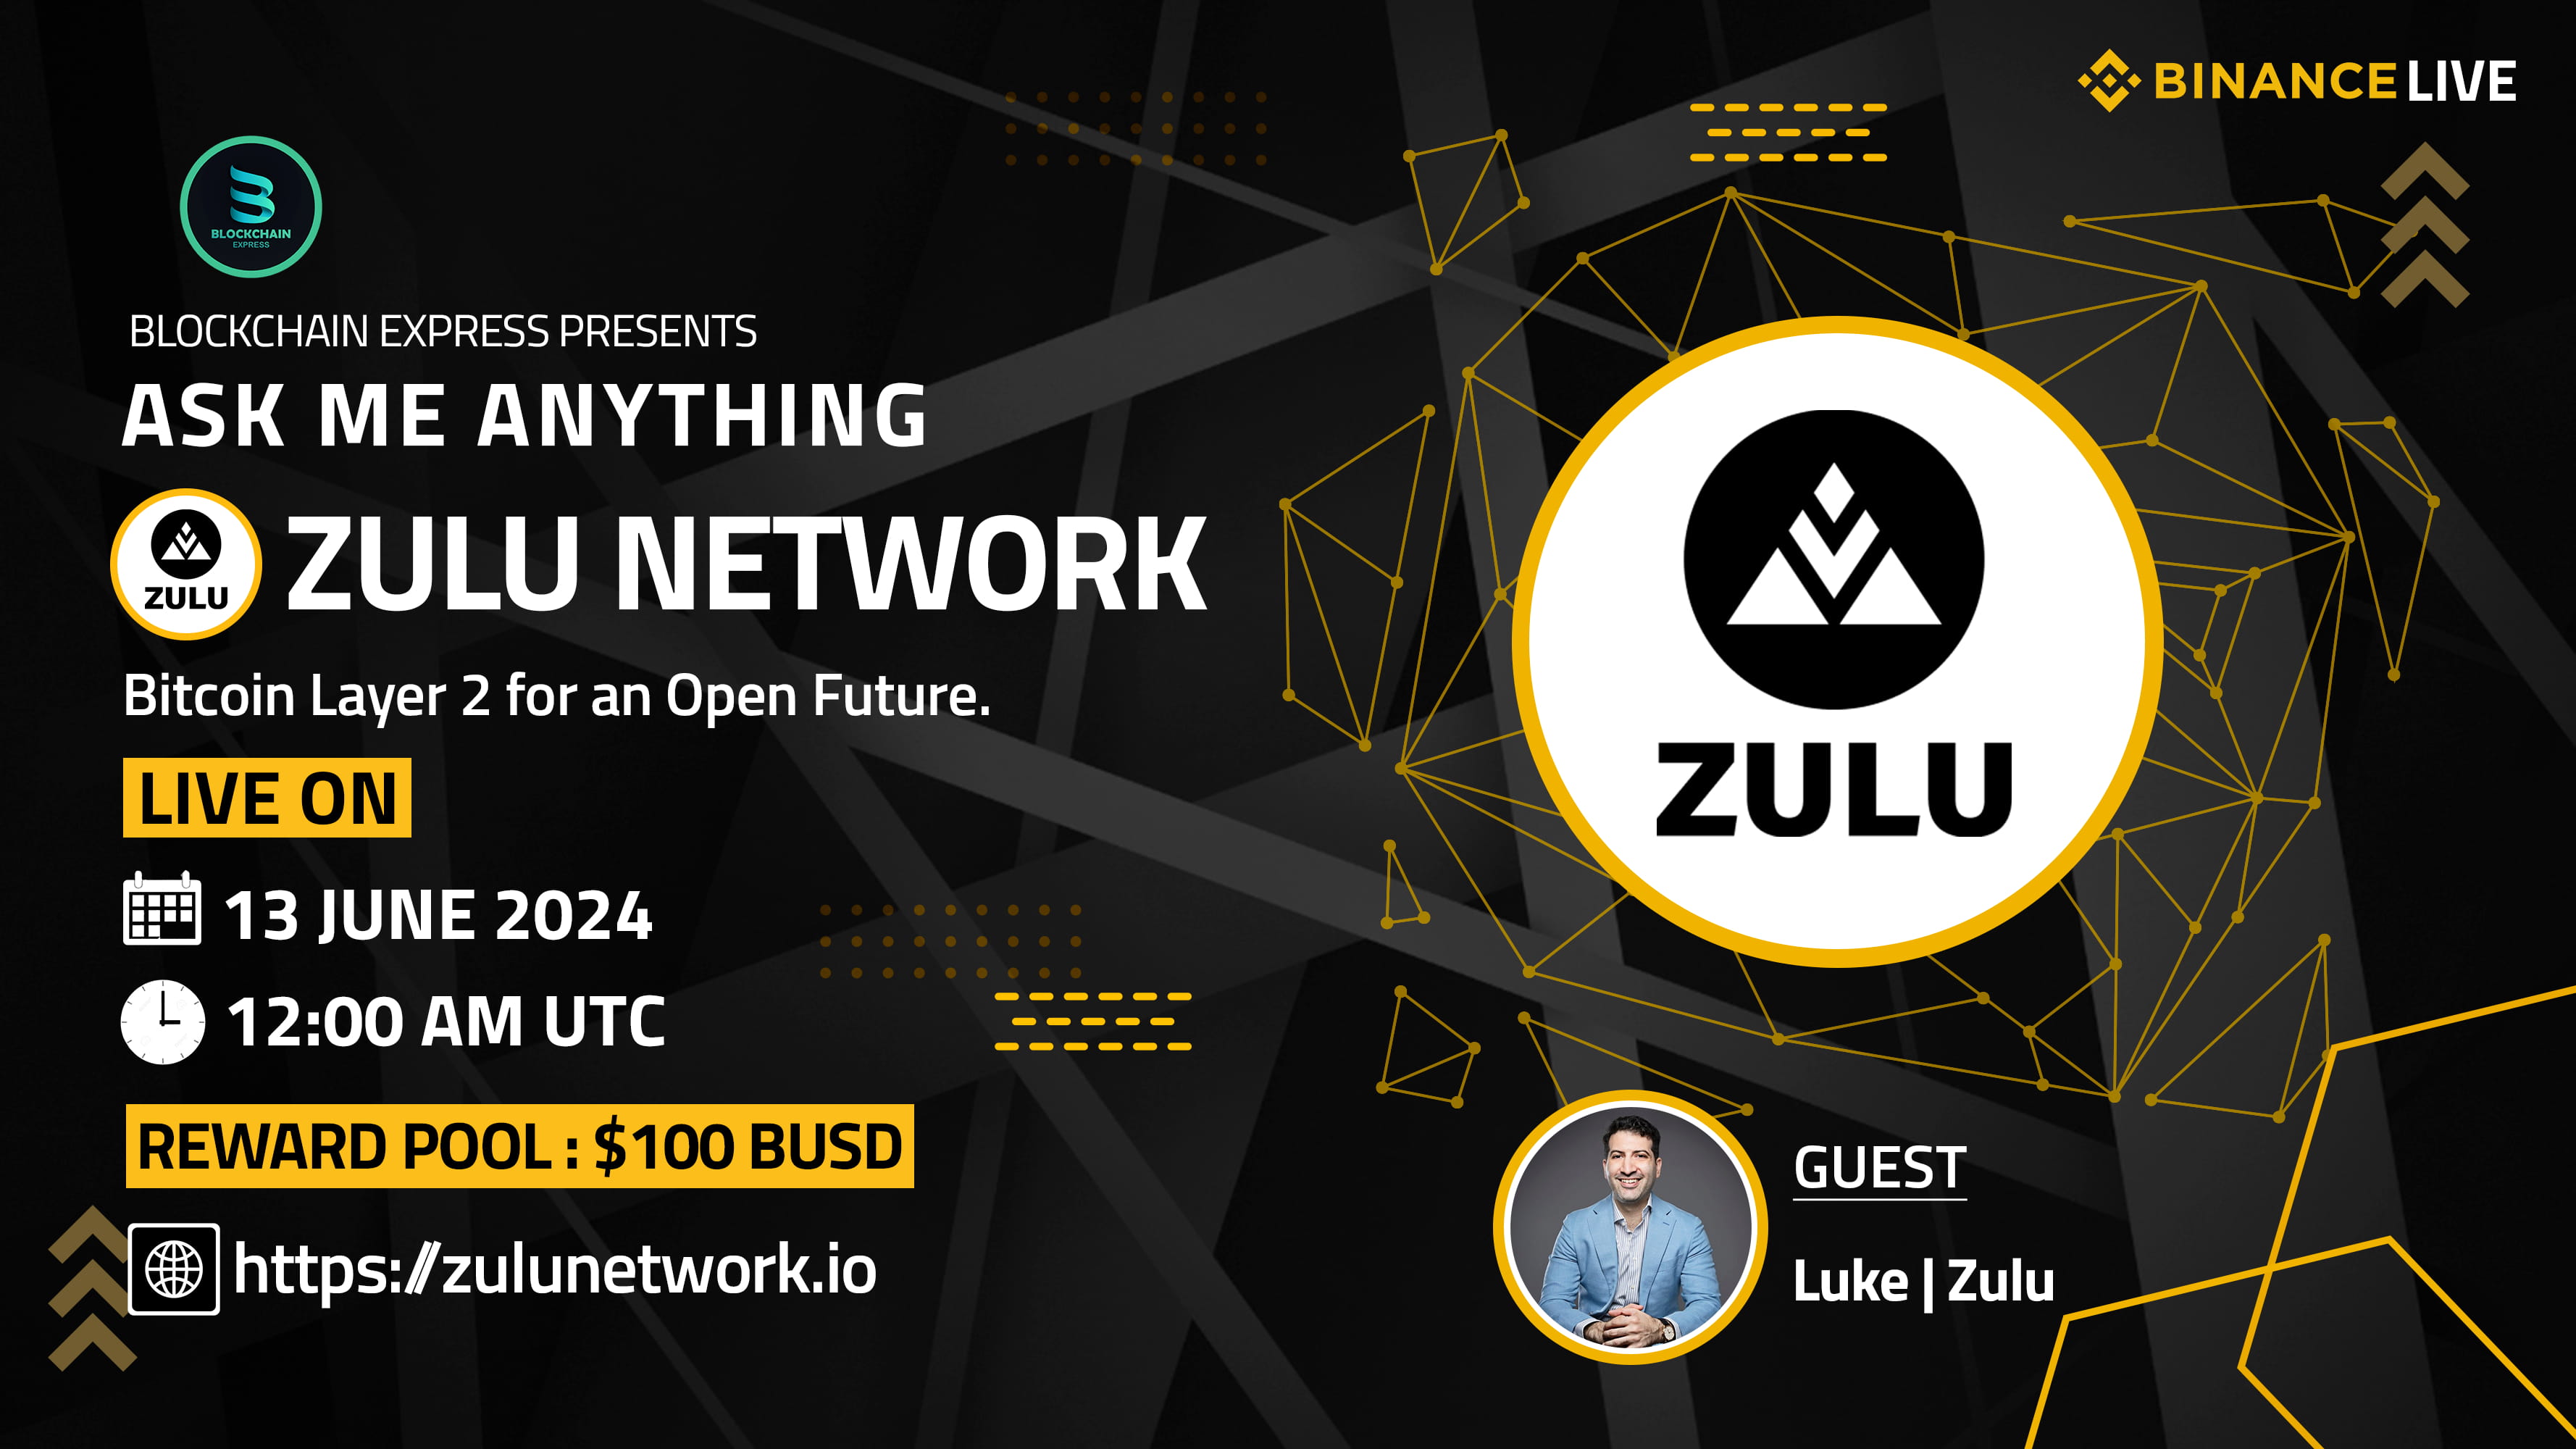 ₿lockchain Express will be hosting an AMA session with" Zulu Network "